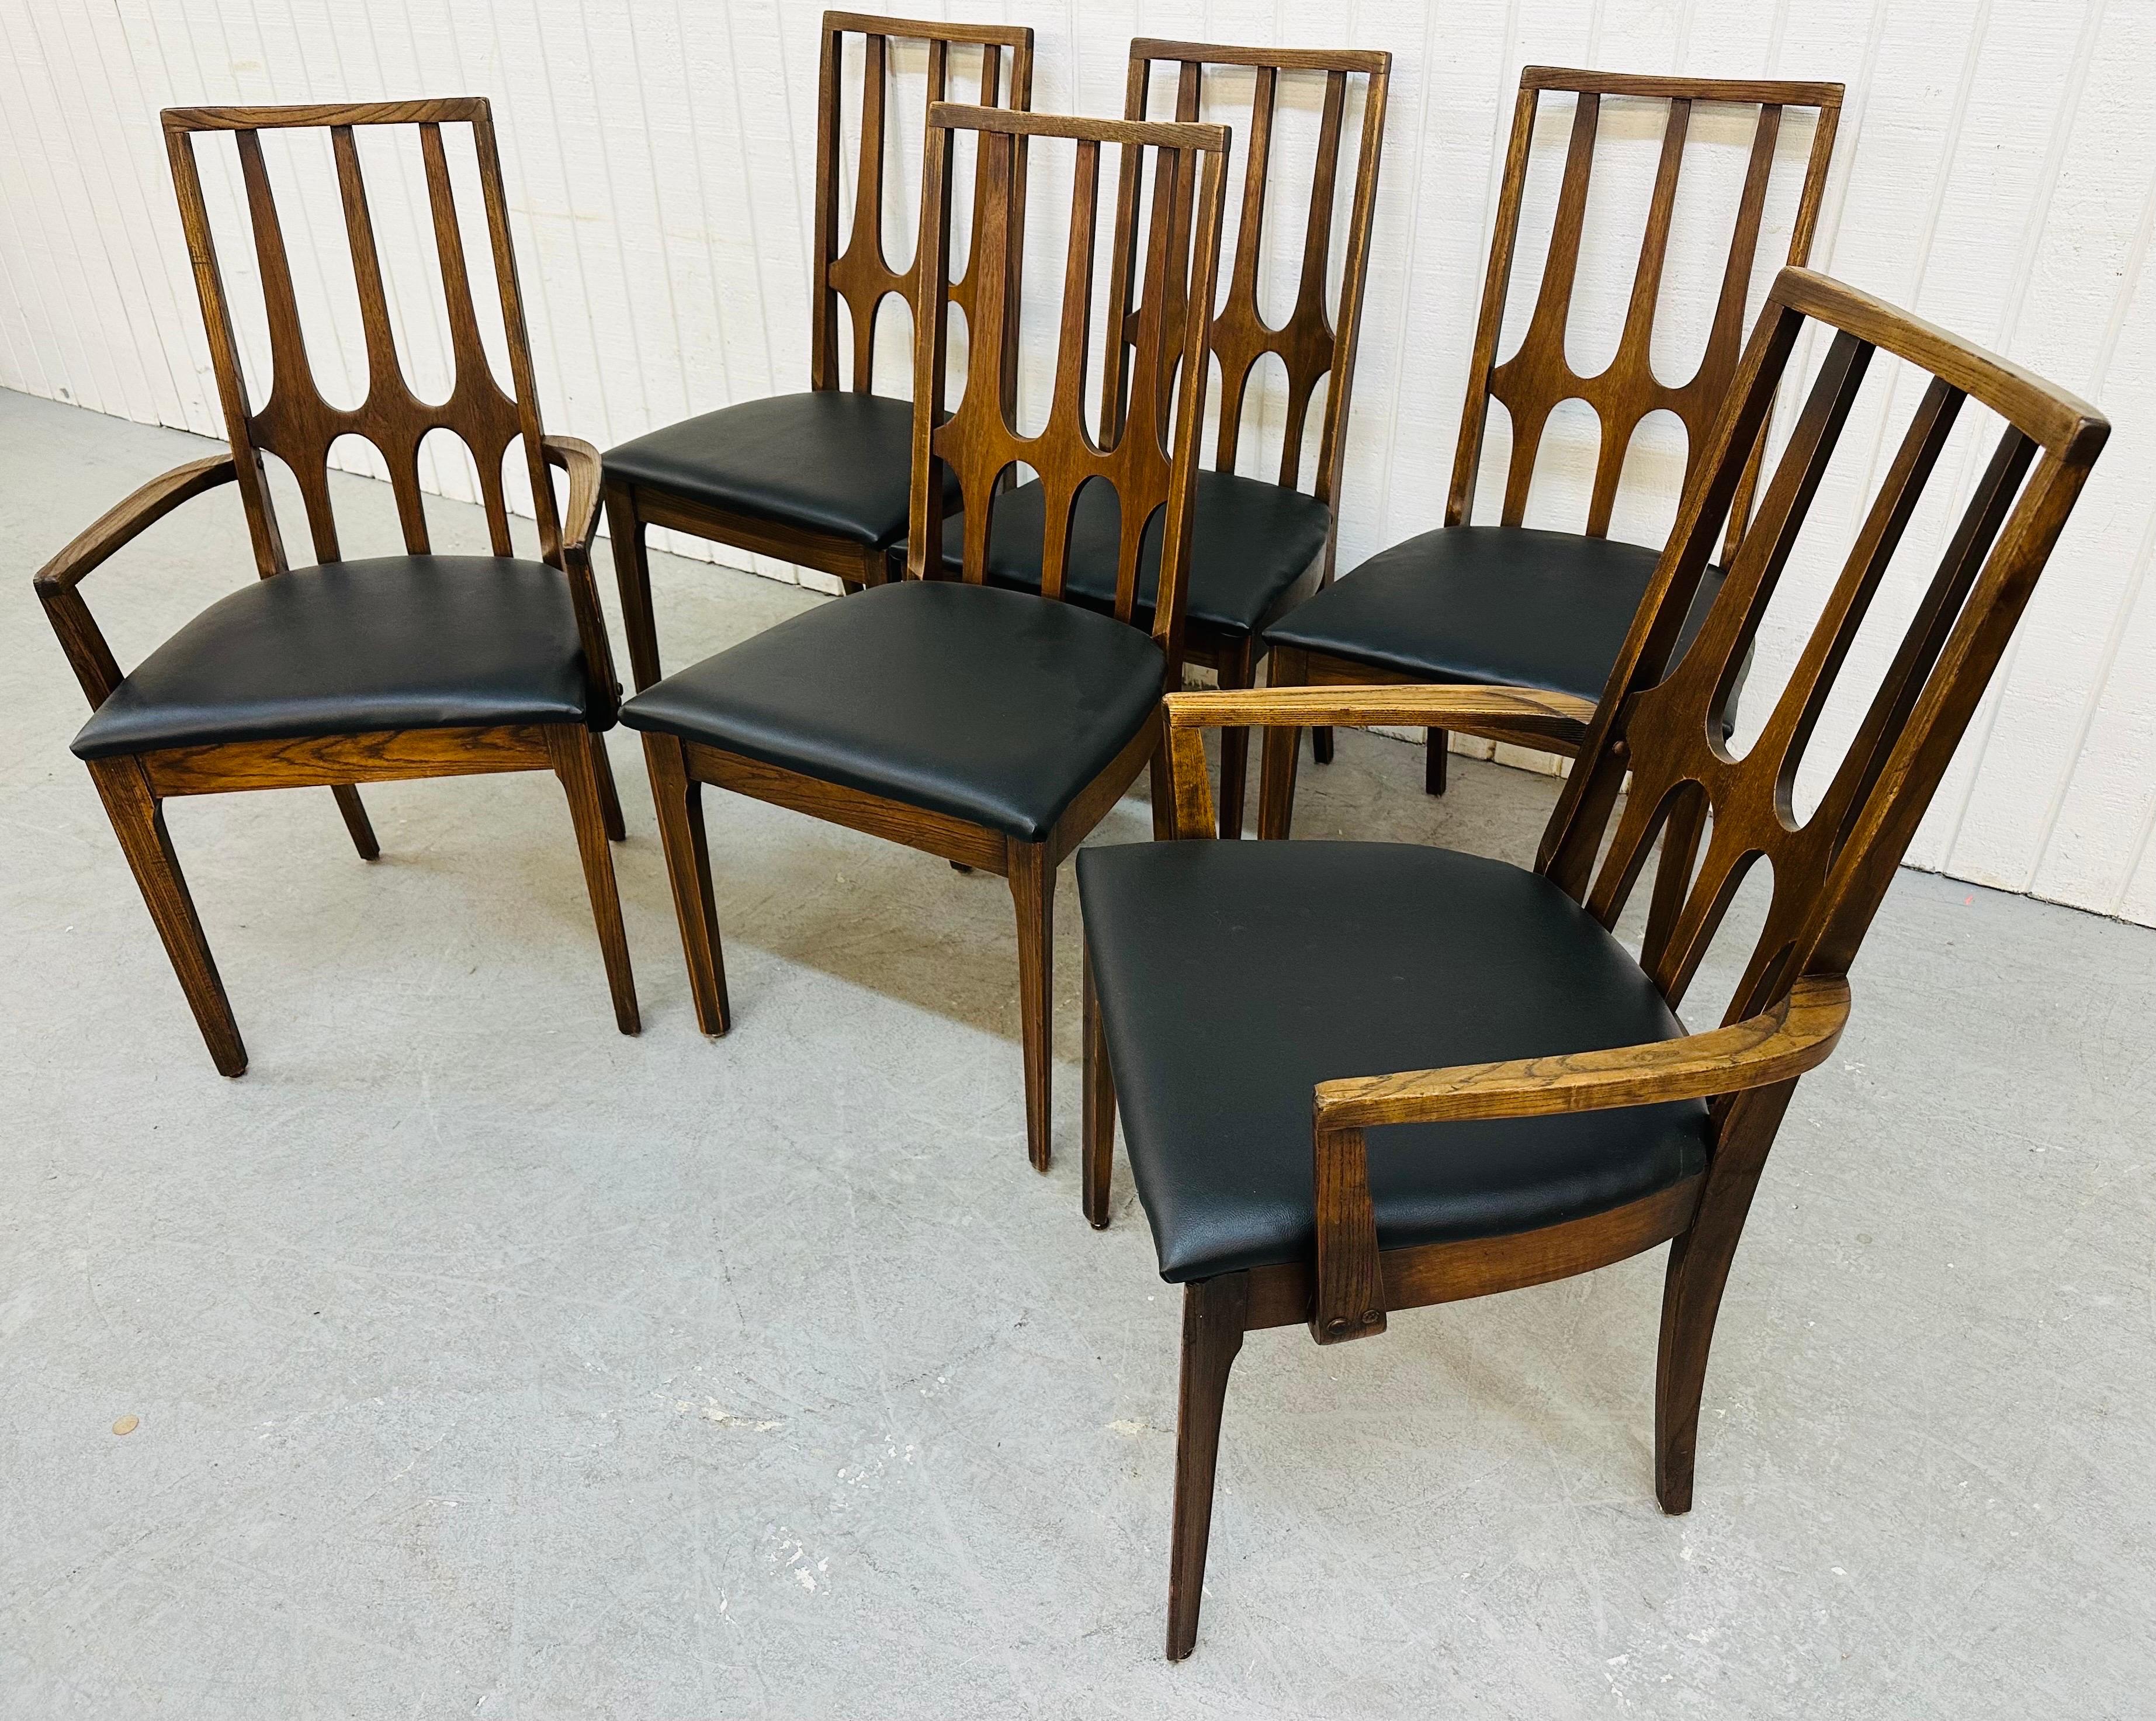 This listing is for a set of six Mid-Century Modern Broyhill Brasilia Walnut Dining Chairs. Featuring two arm chairs, four straight chairs, newly upholstered black vinyl seats, and sculpted high back rests. This is an exceptional combination of